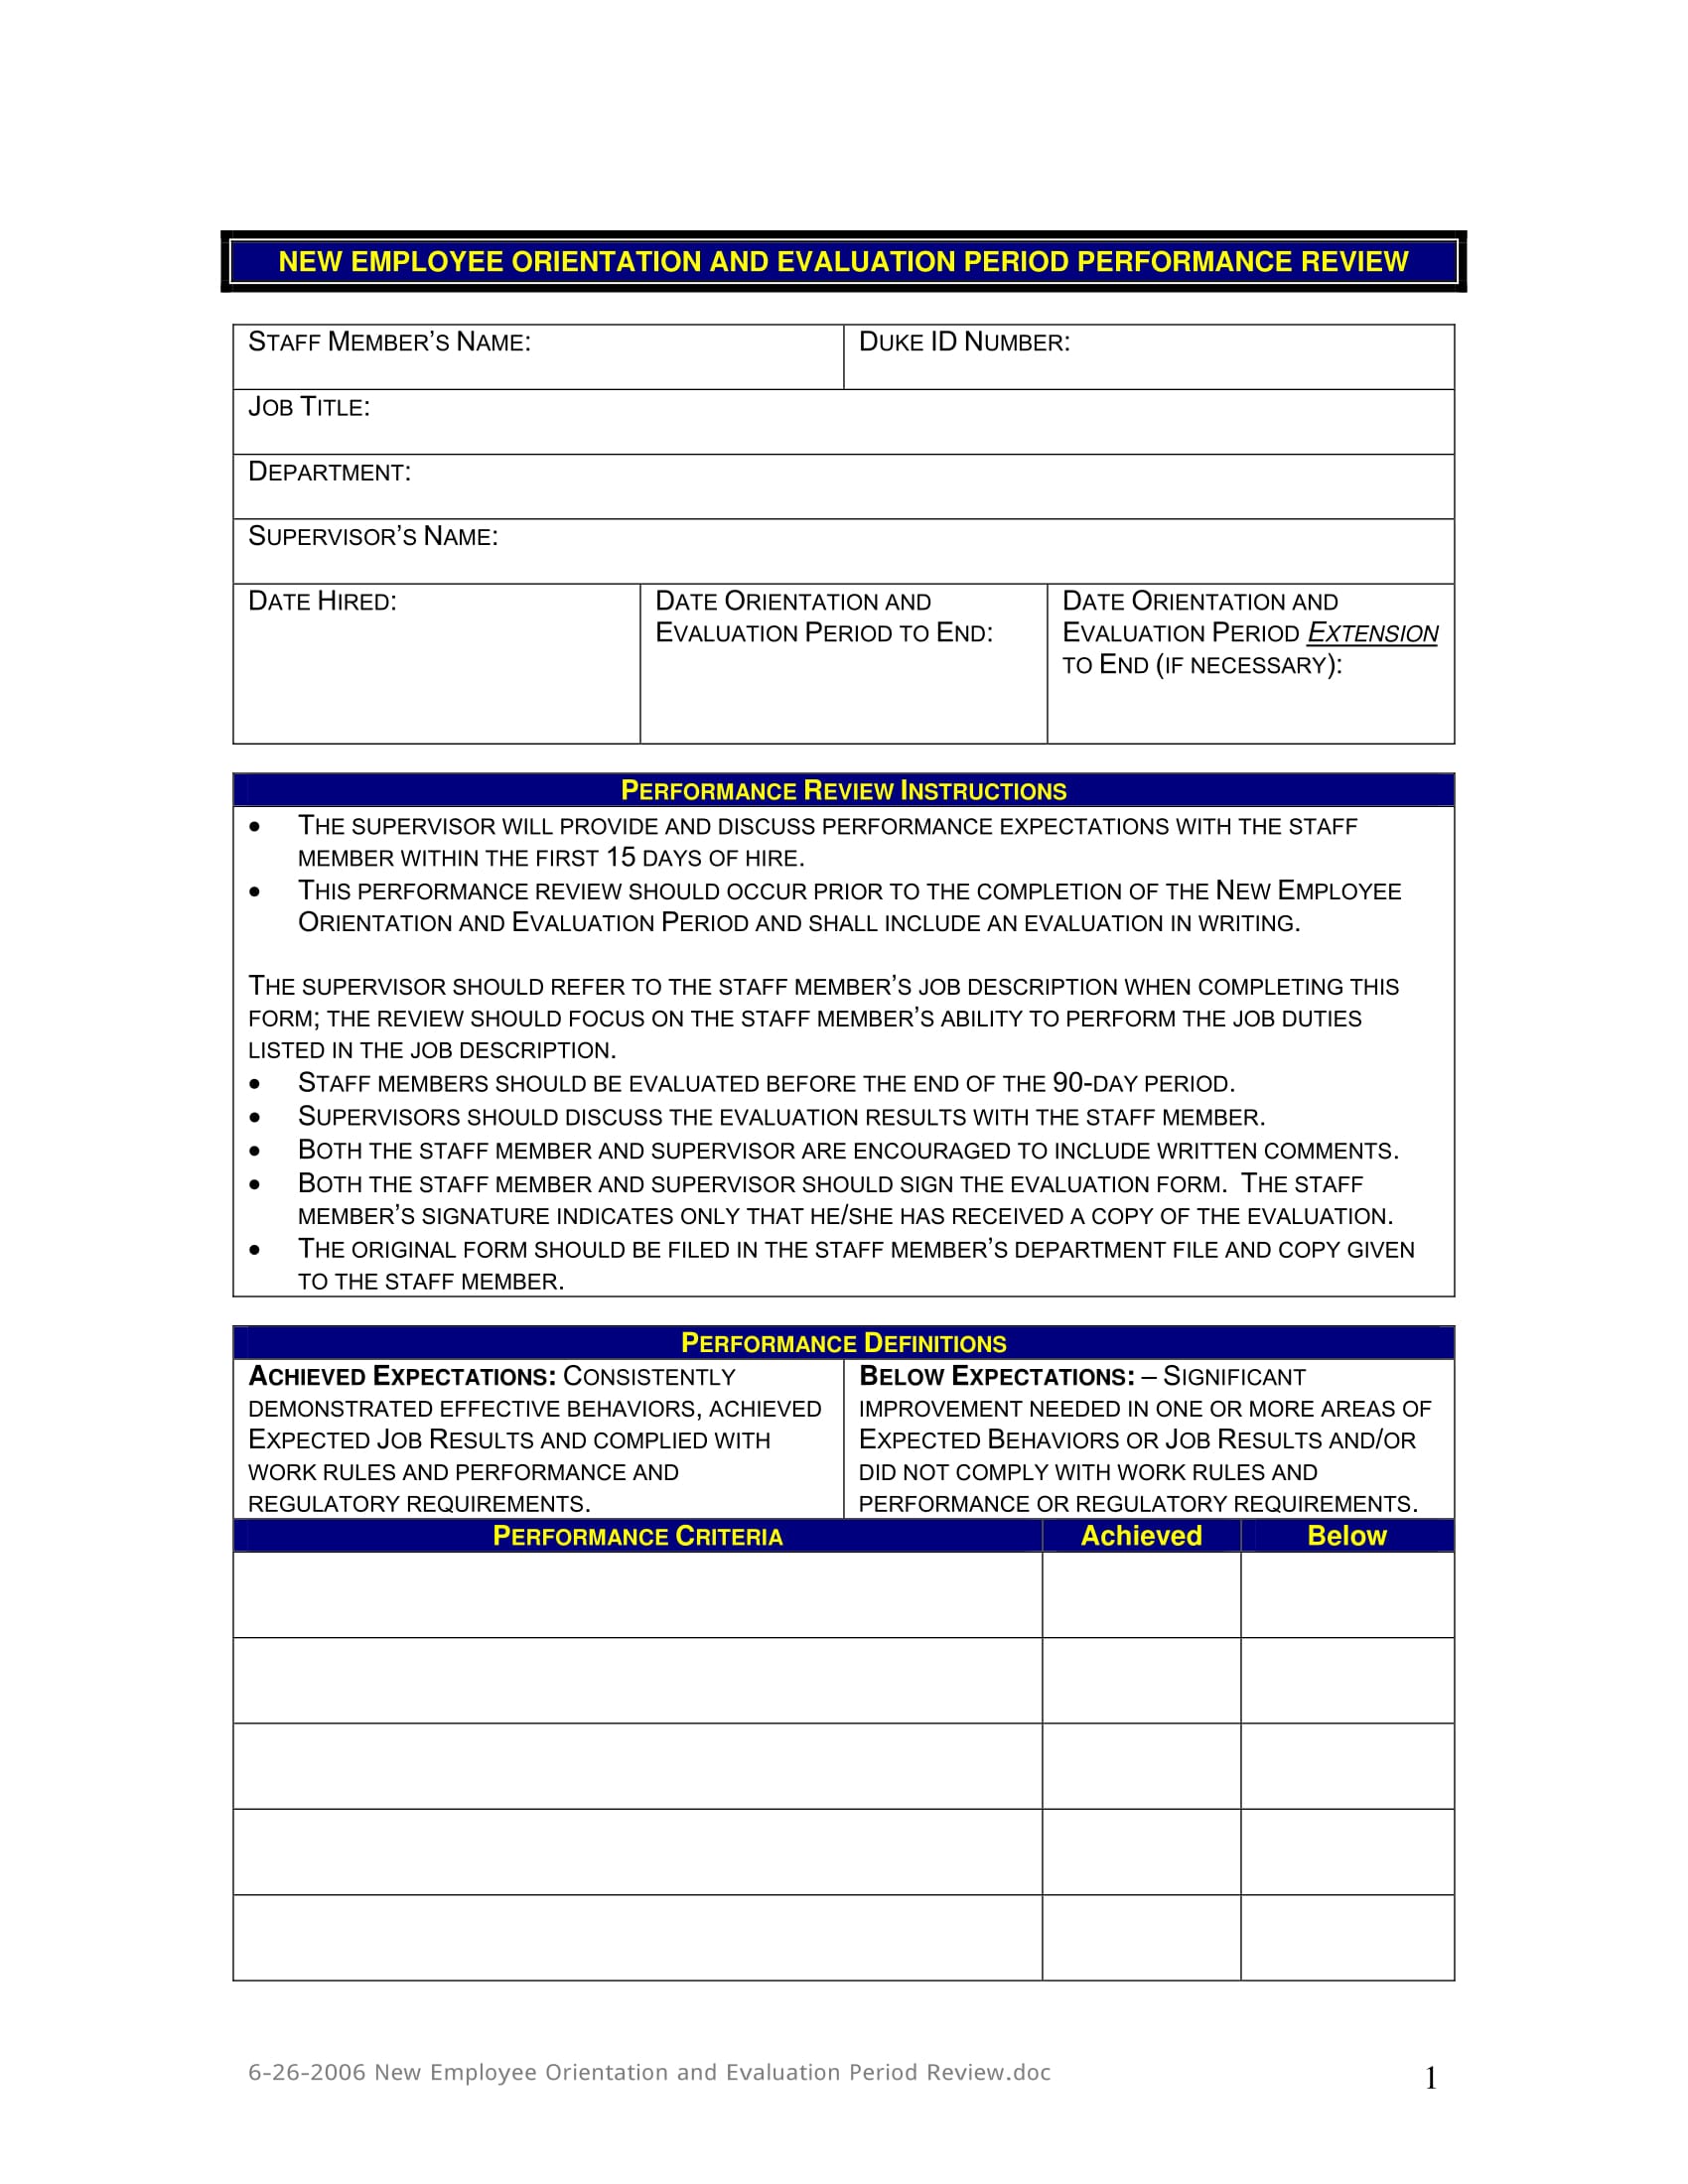 employee evaluation period review form 1